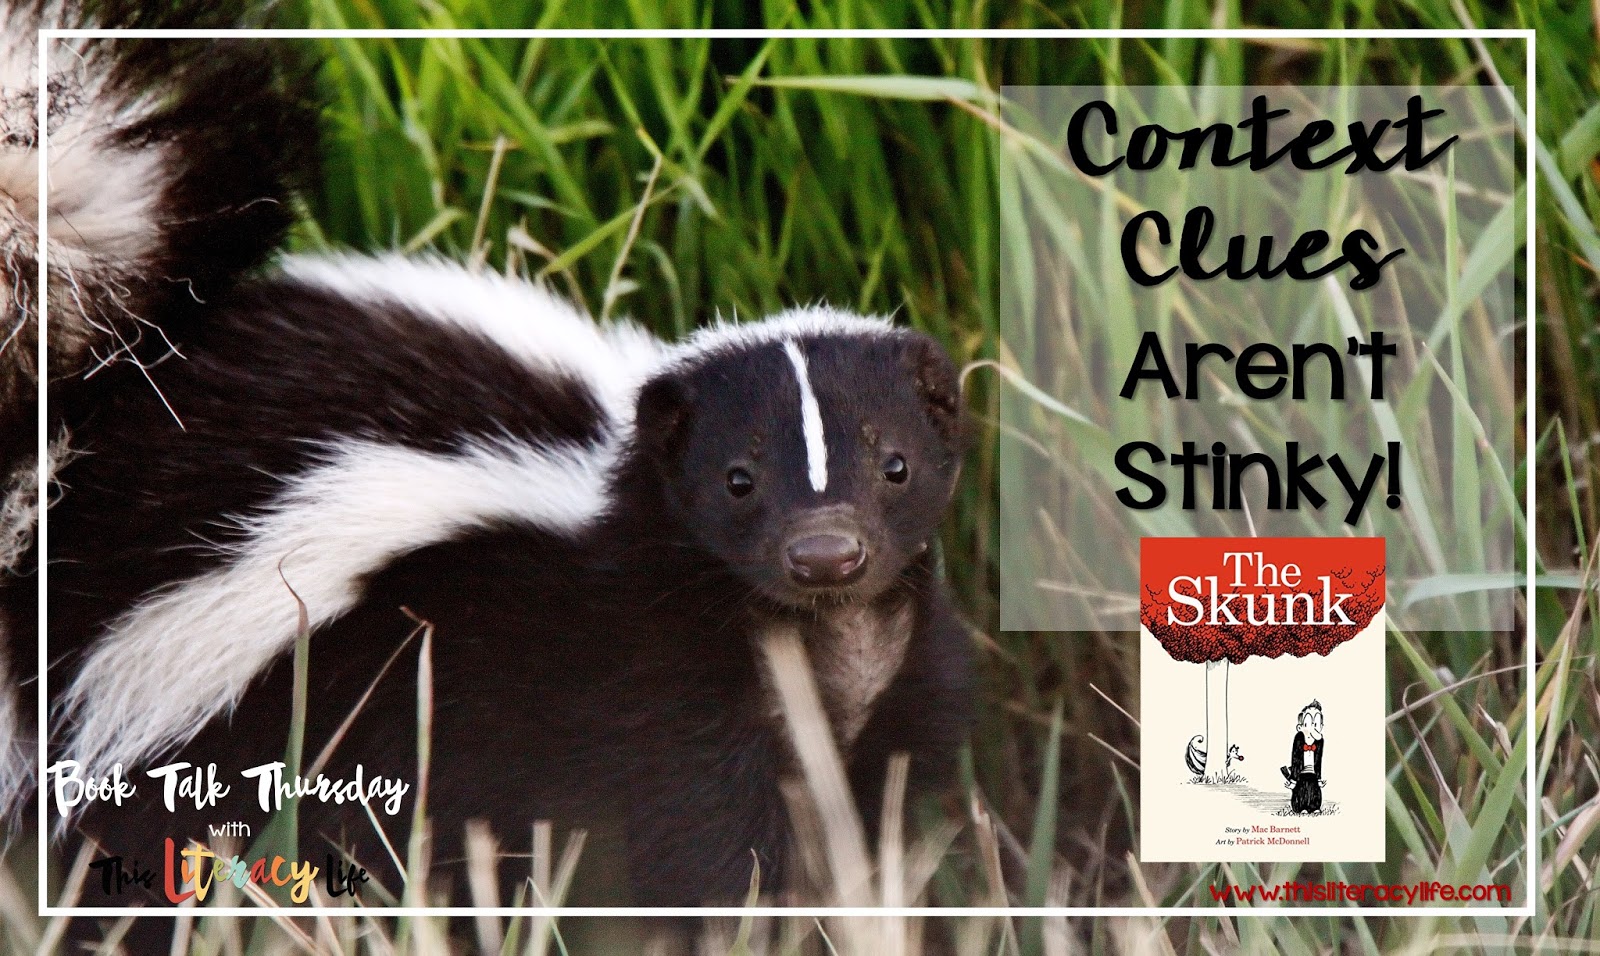 Context clues can be tricky for many students, but the fun book The Skunk will have students thinking about the words and how the young man will get away from the skunk!